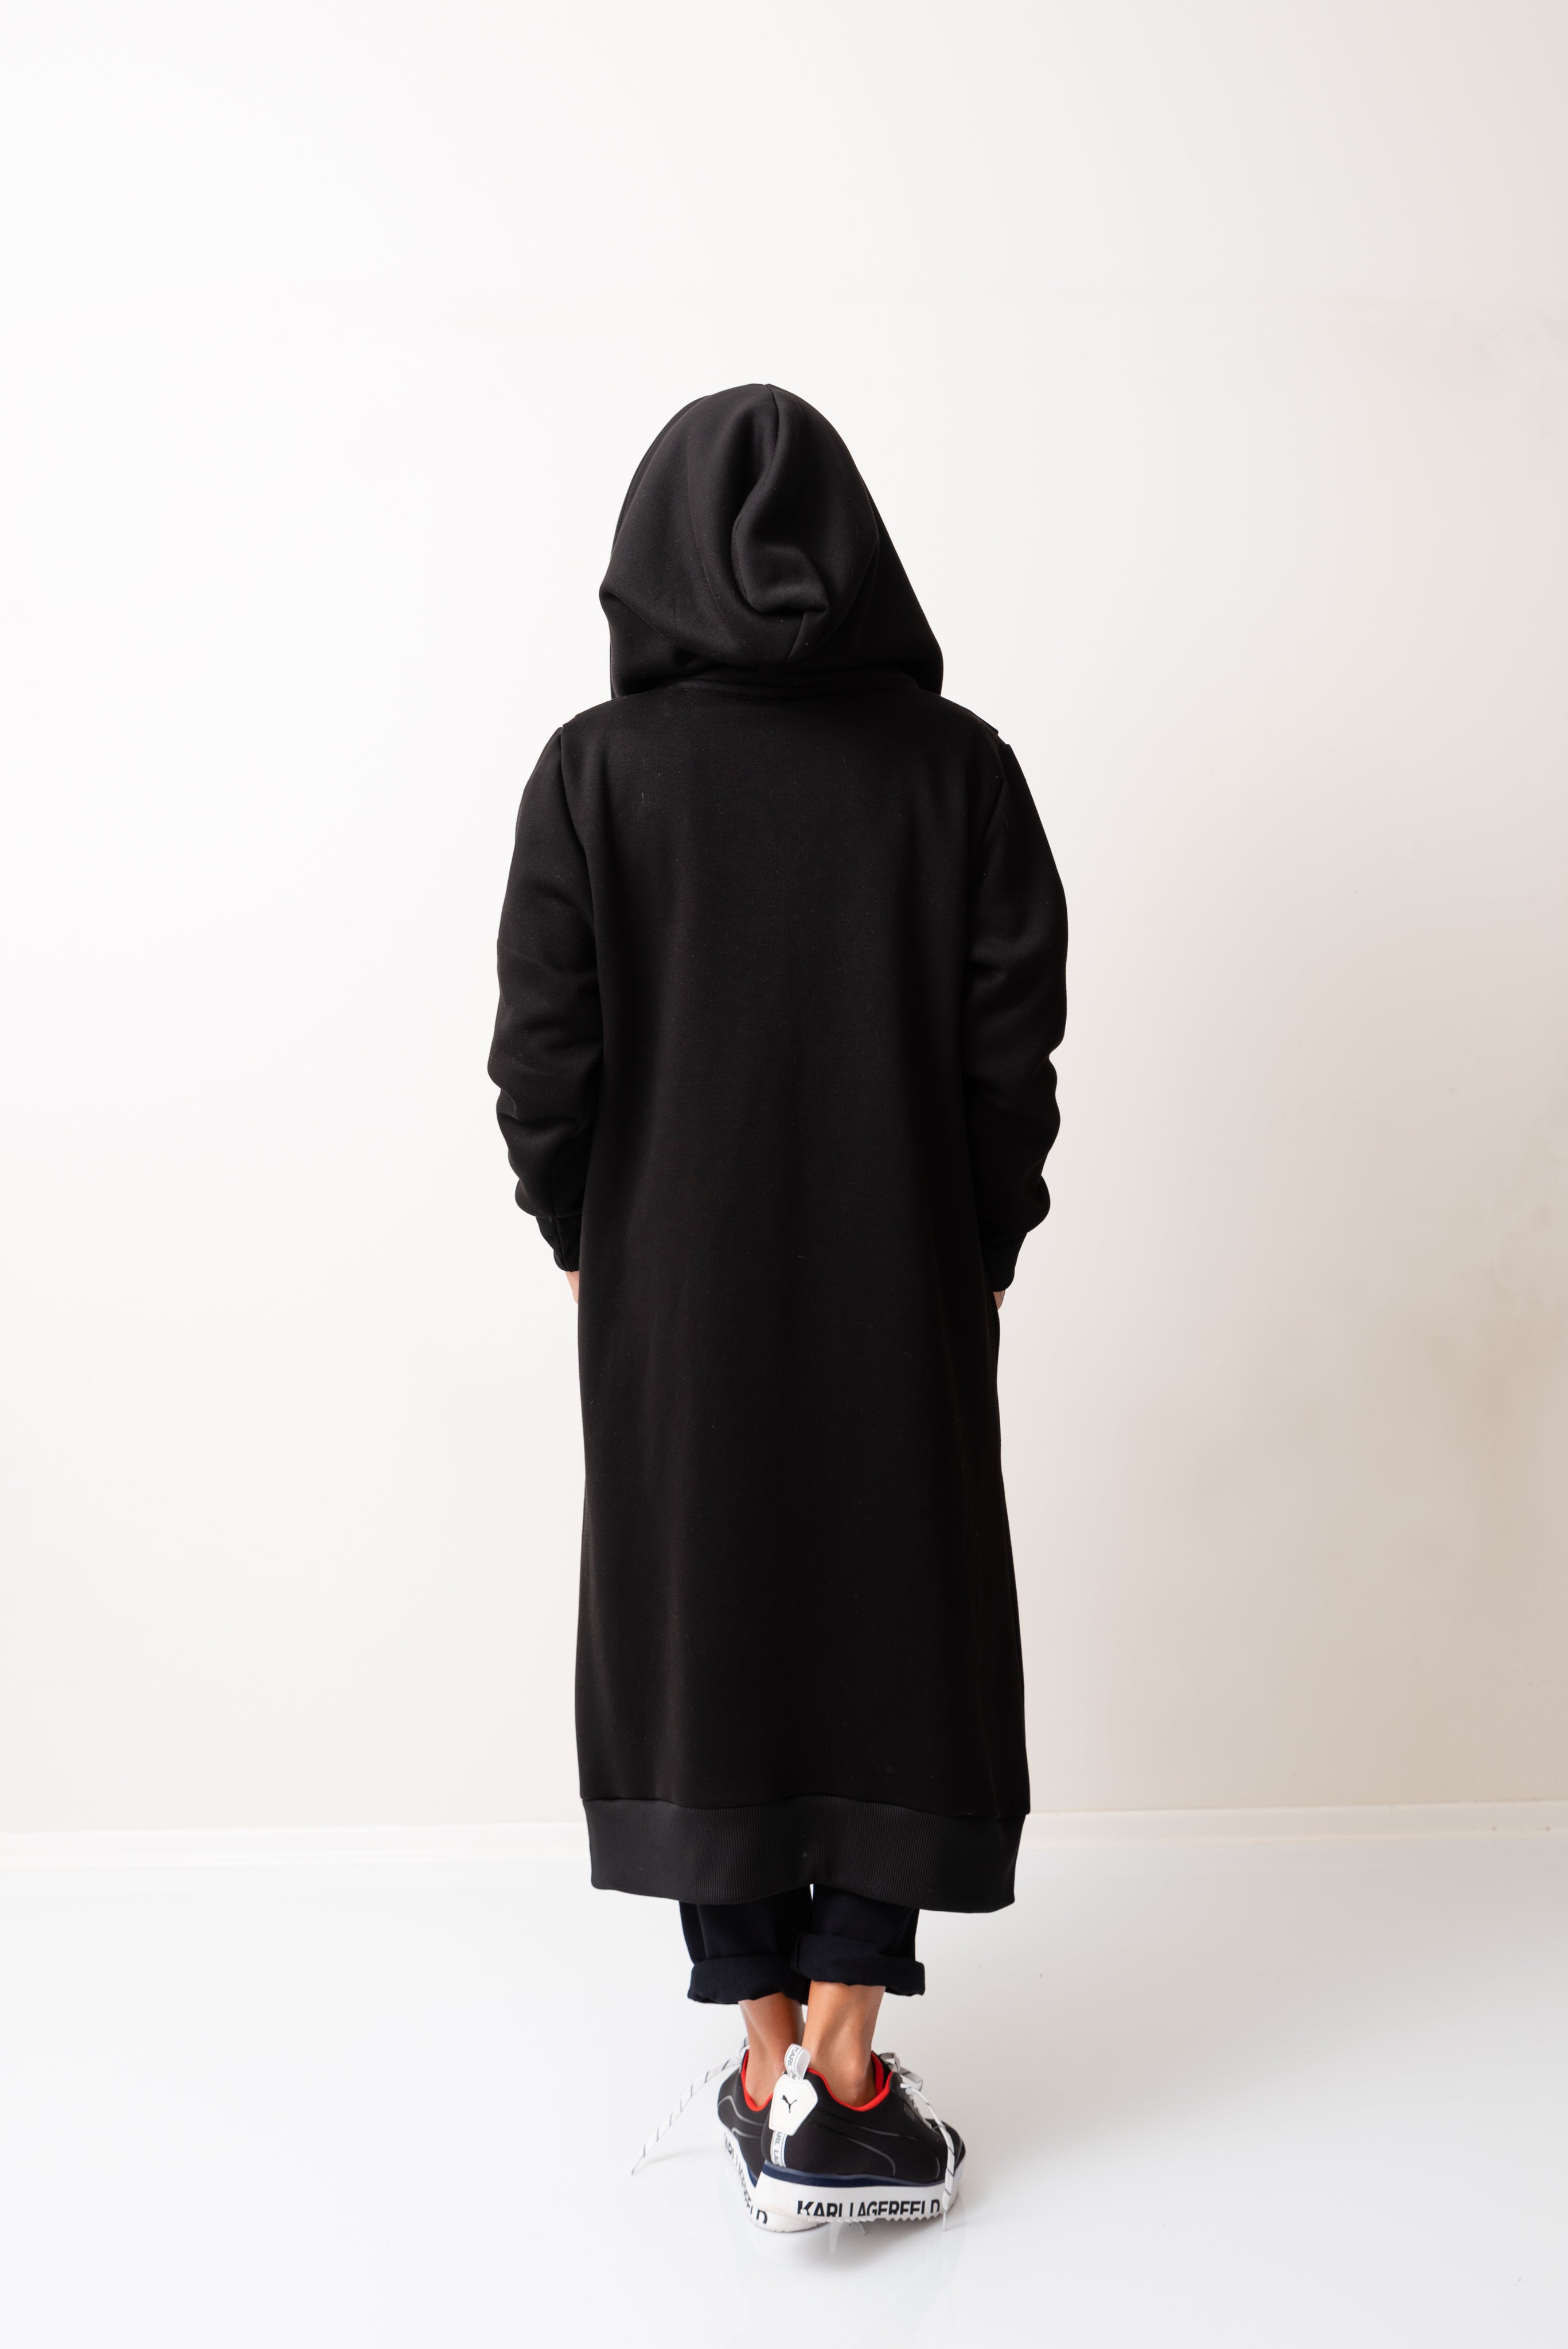 Black Warm Oversized Quilted Hoodie Sweatshirt  with Long Sleeves and Front Zipper - Clothes By Locker Room